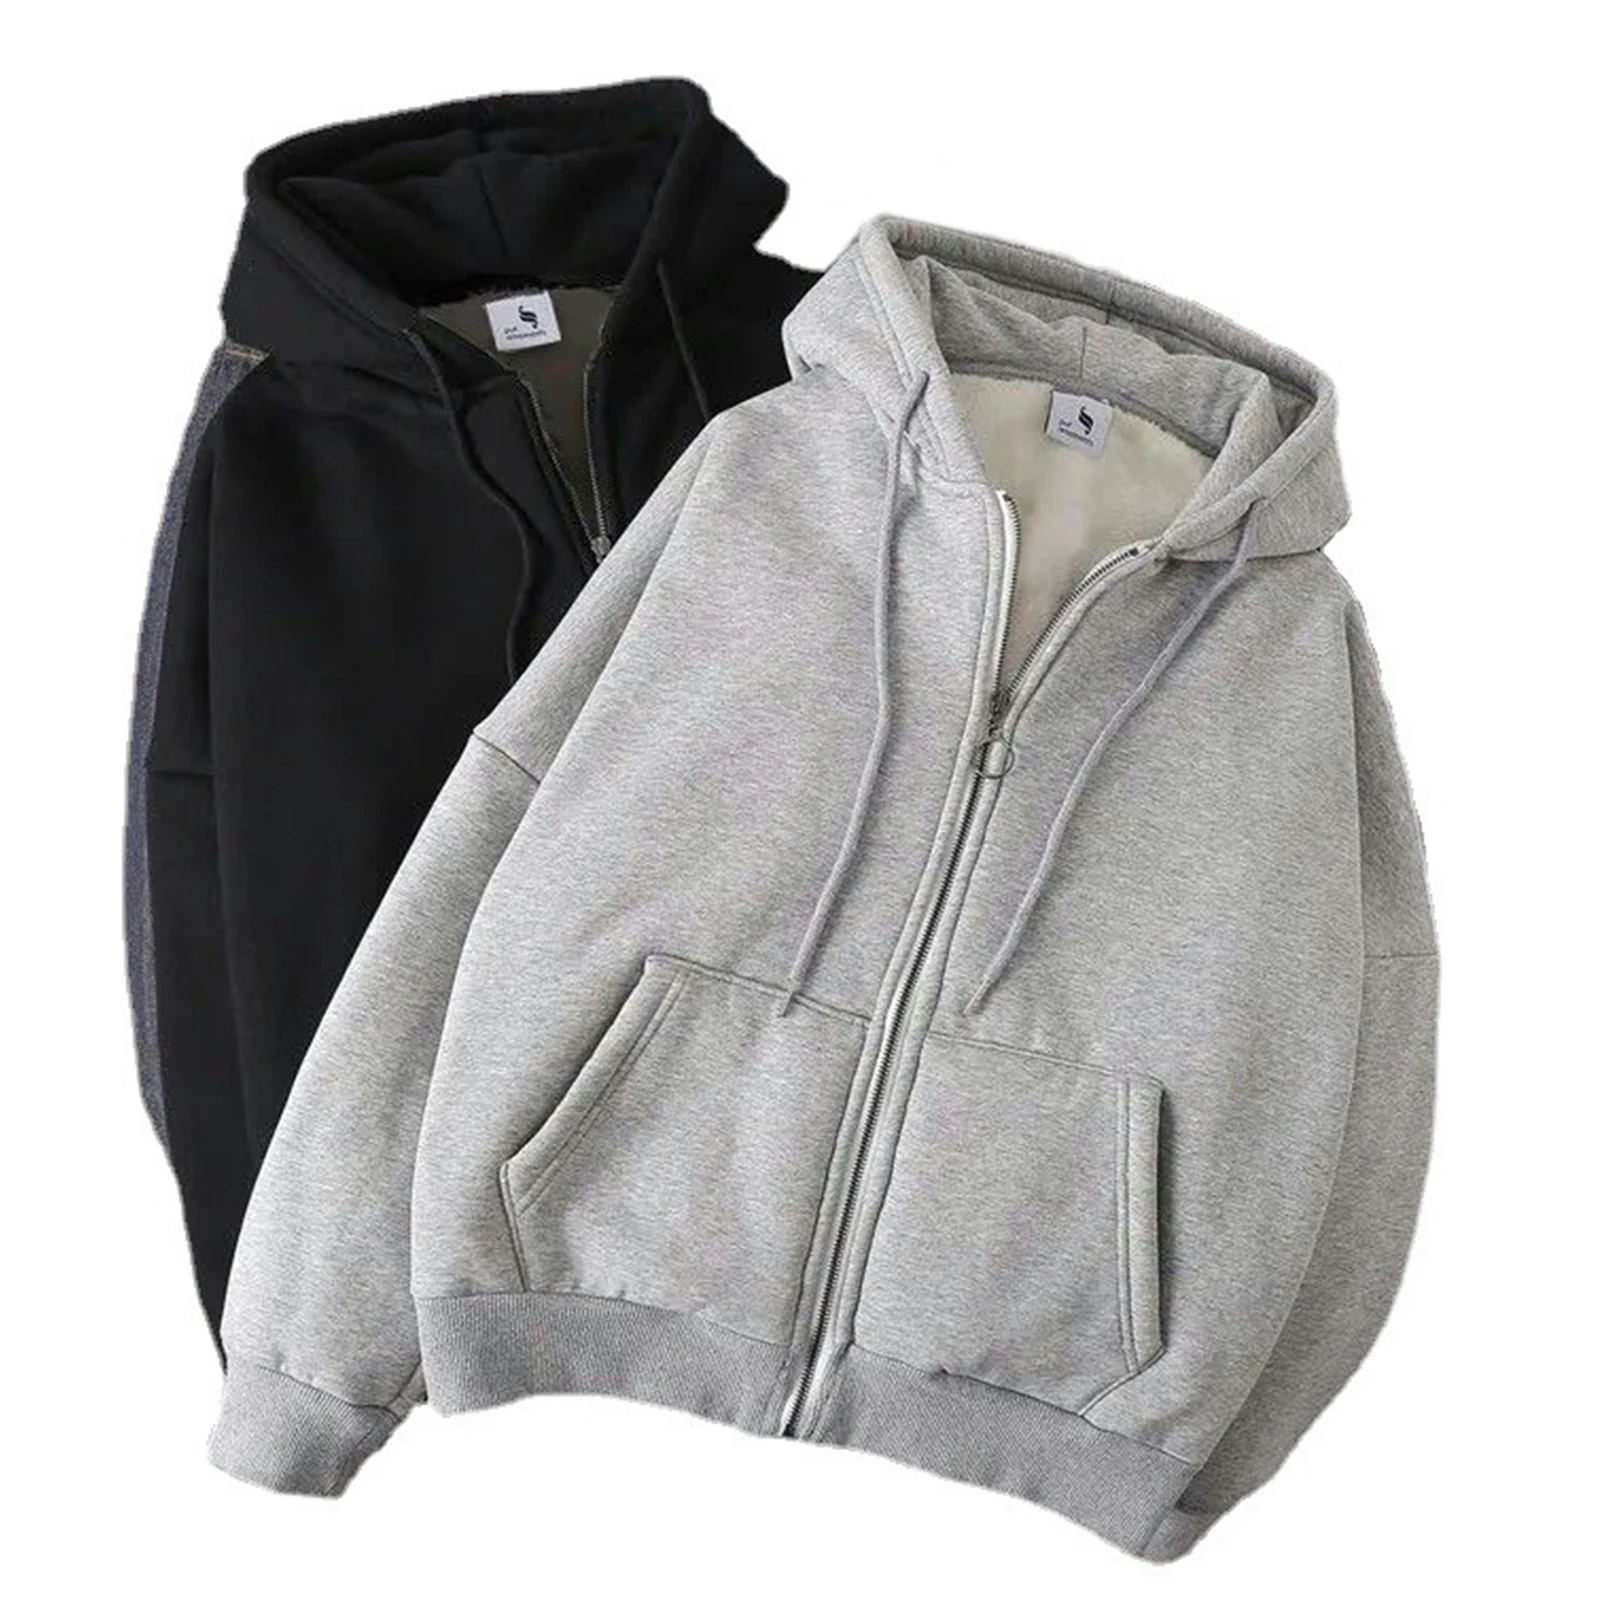 

Oversize Sweatshirt with Zipper Long Sleeve Stretchy Top with Hemmed Cuffs for Spring Fall Outside Wear